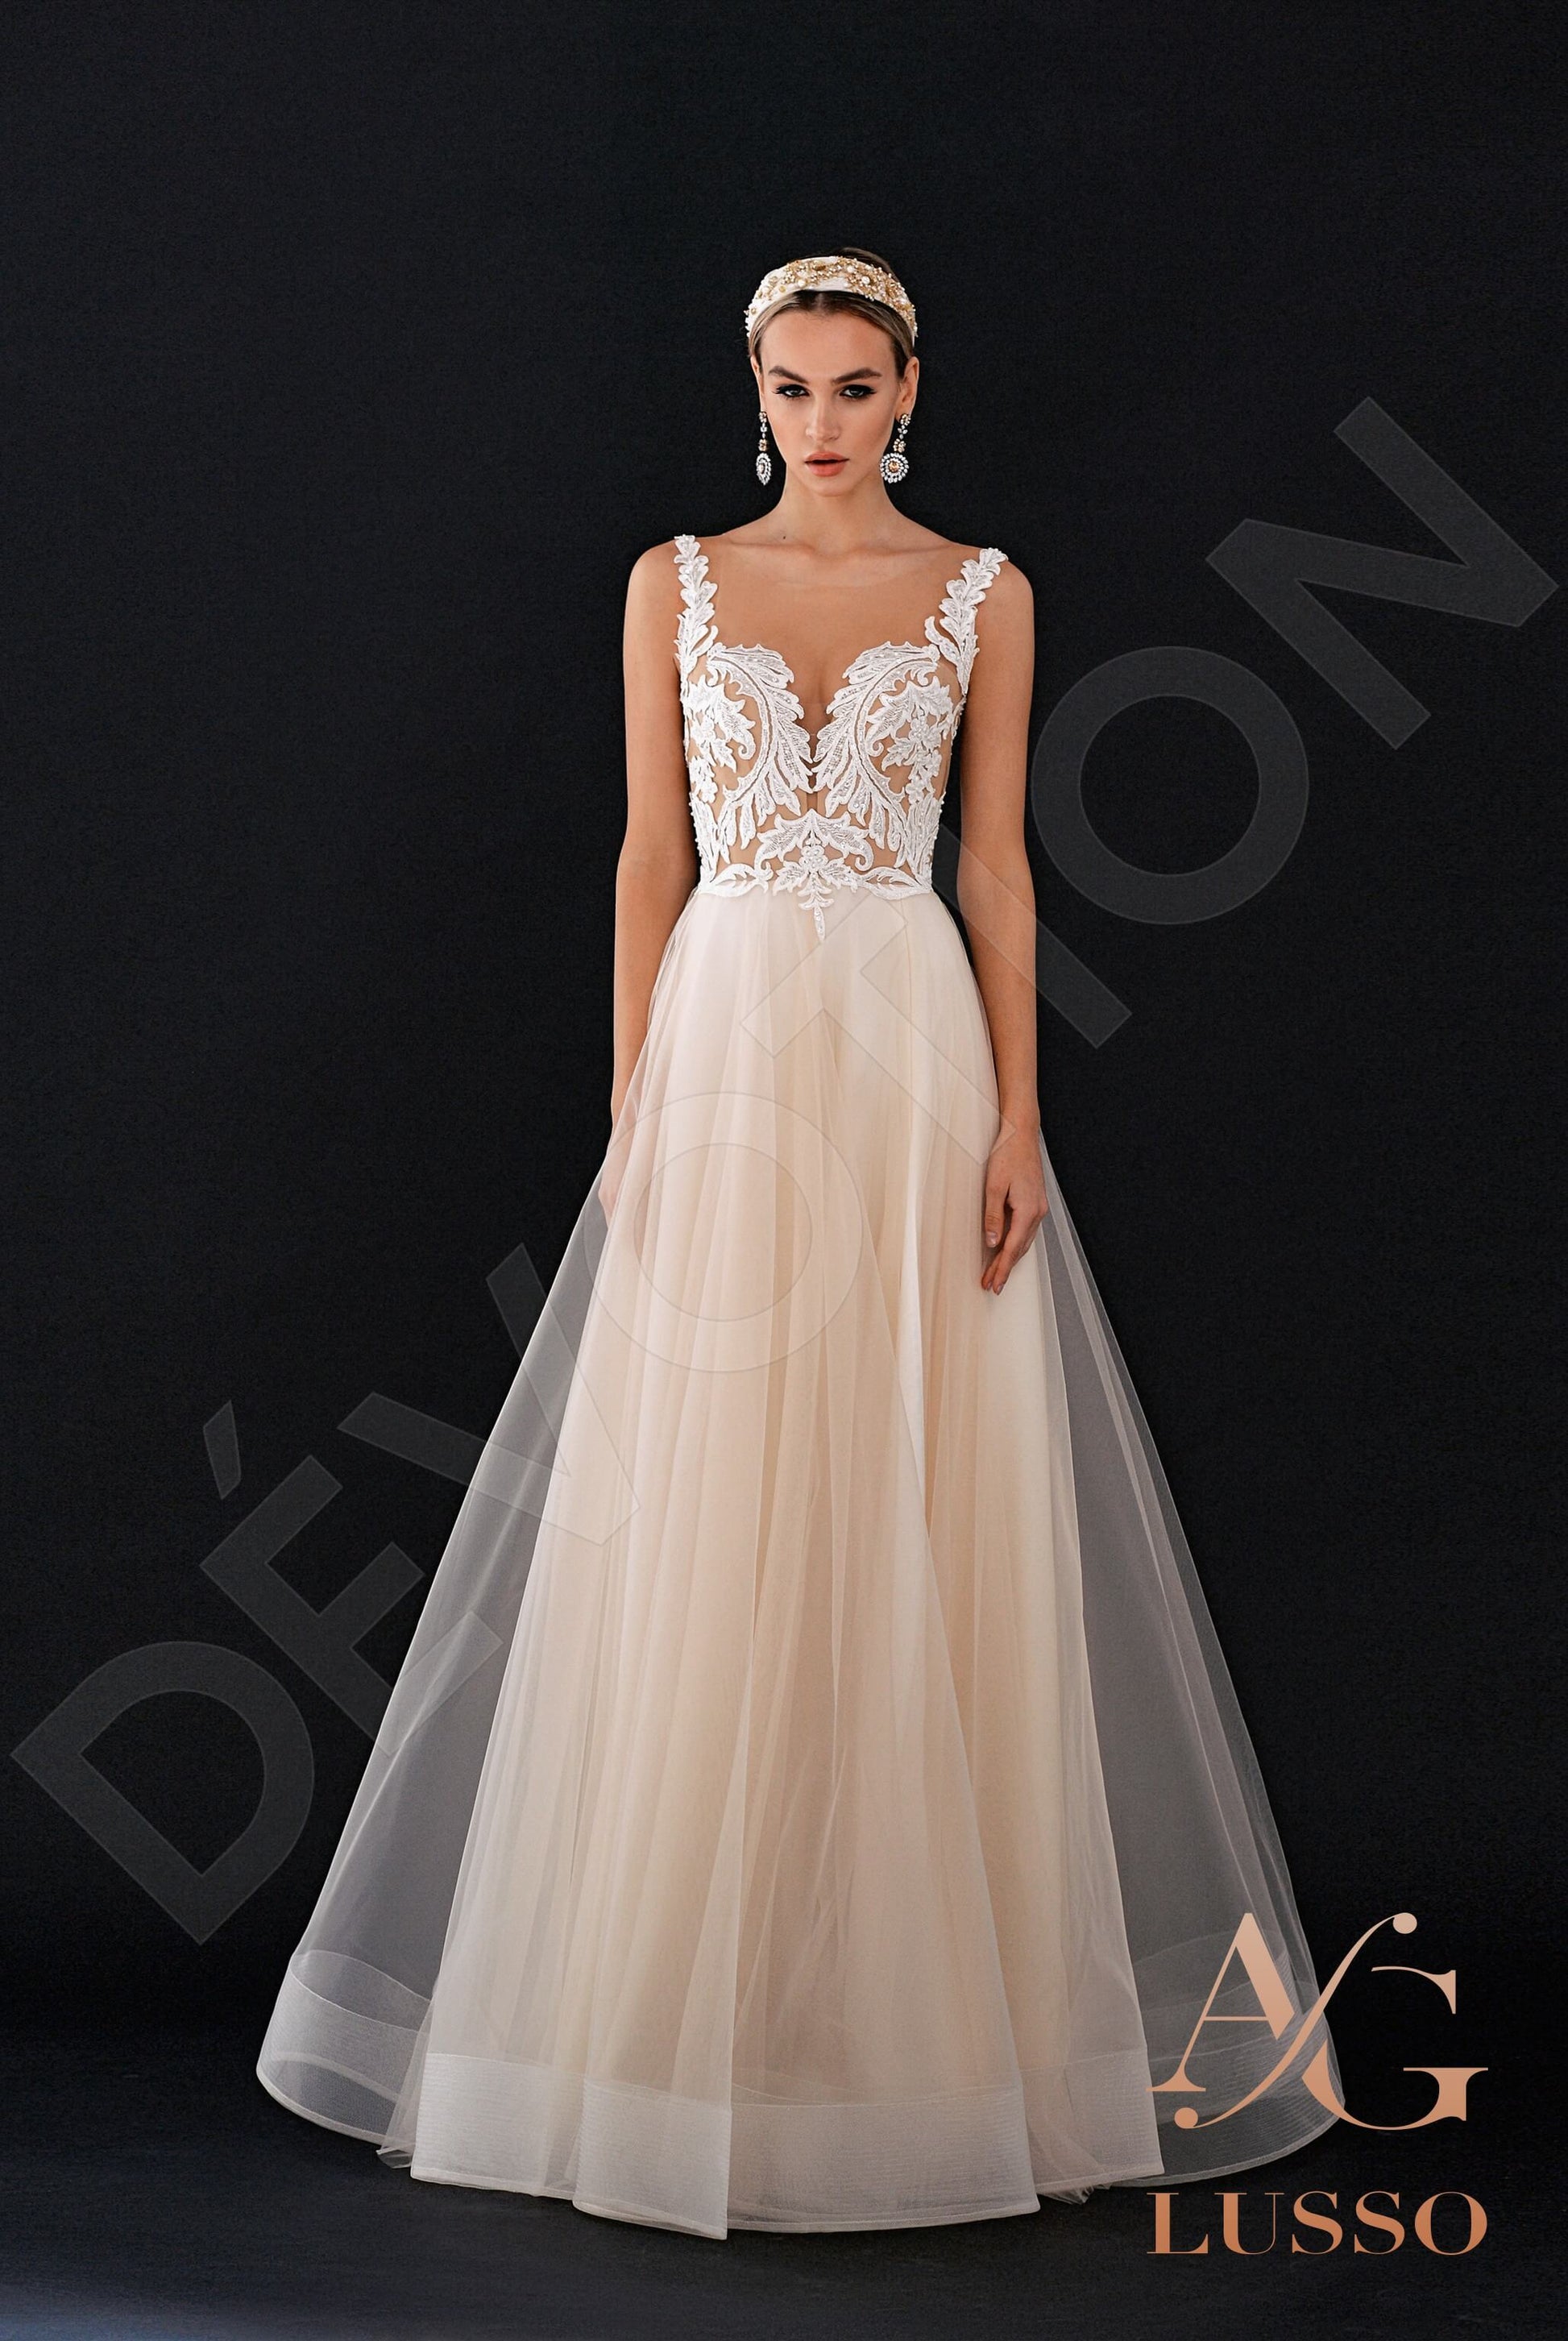 Deny A-line Illusion Cappuccino Ivory Wedding dress